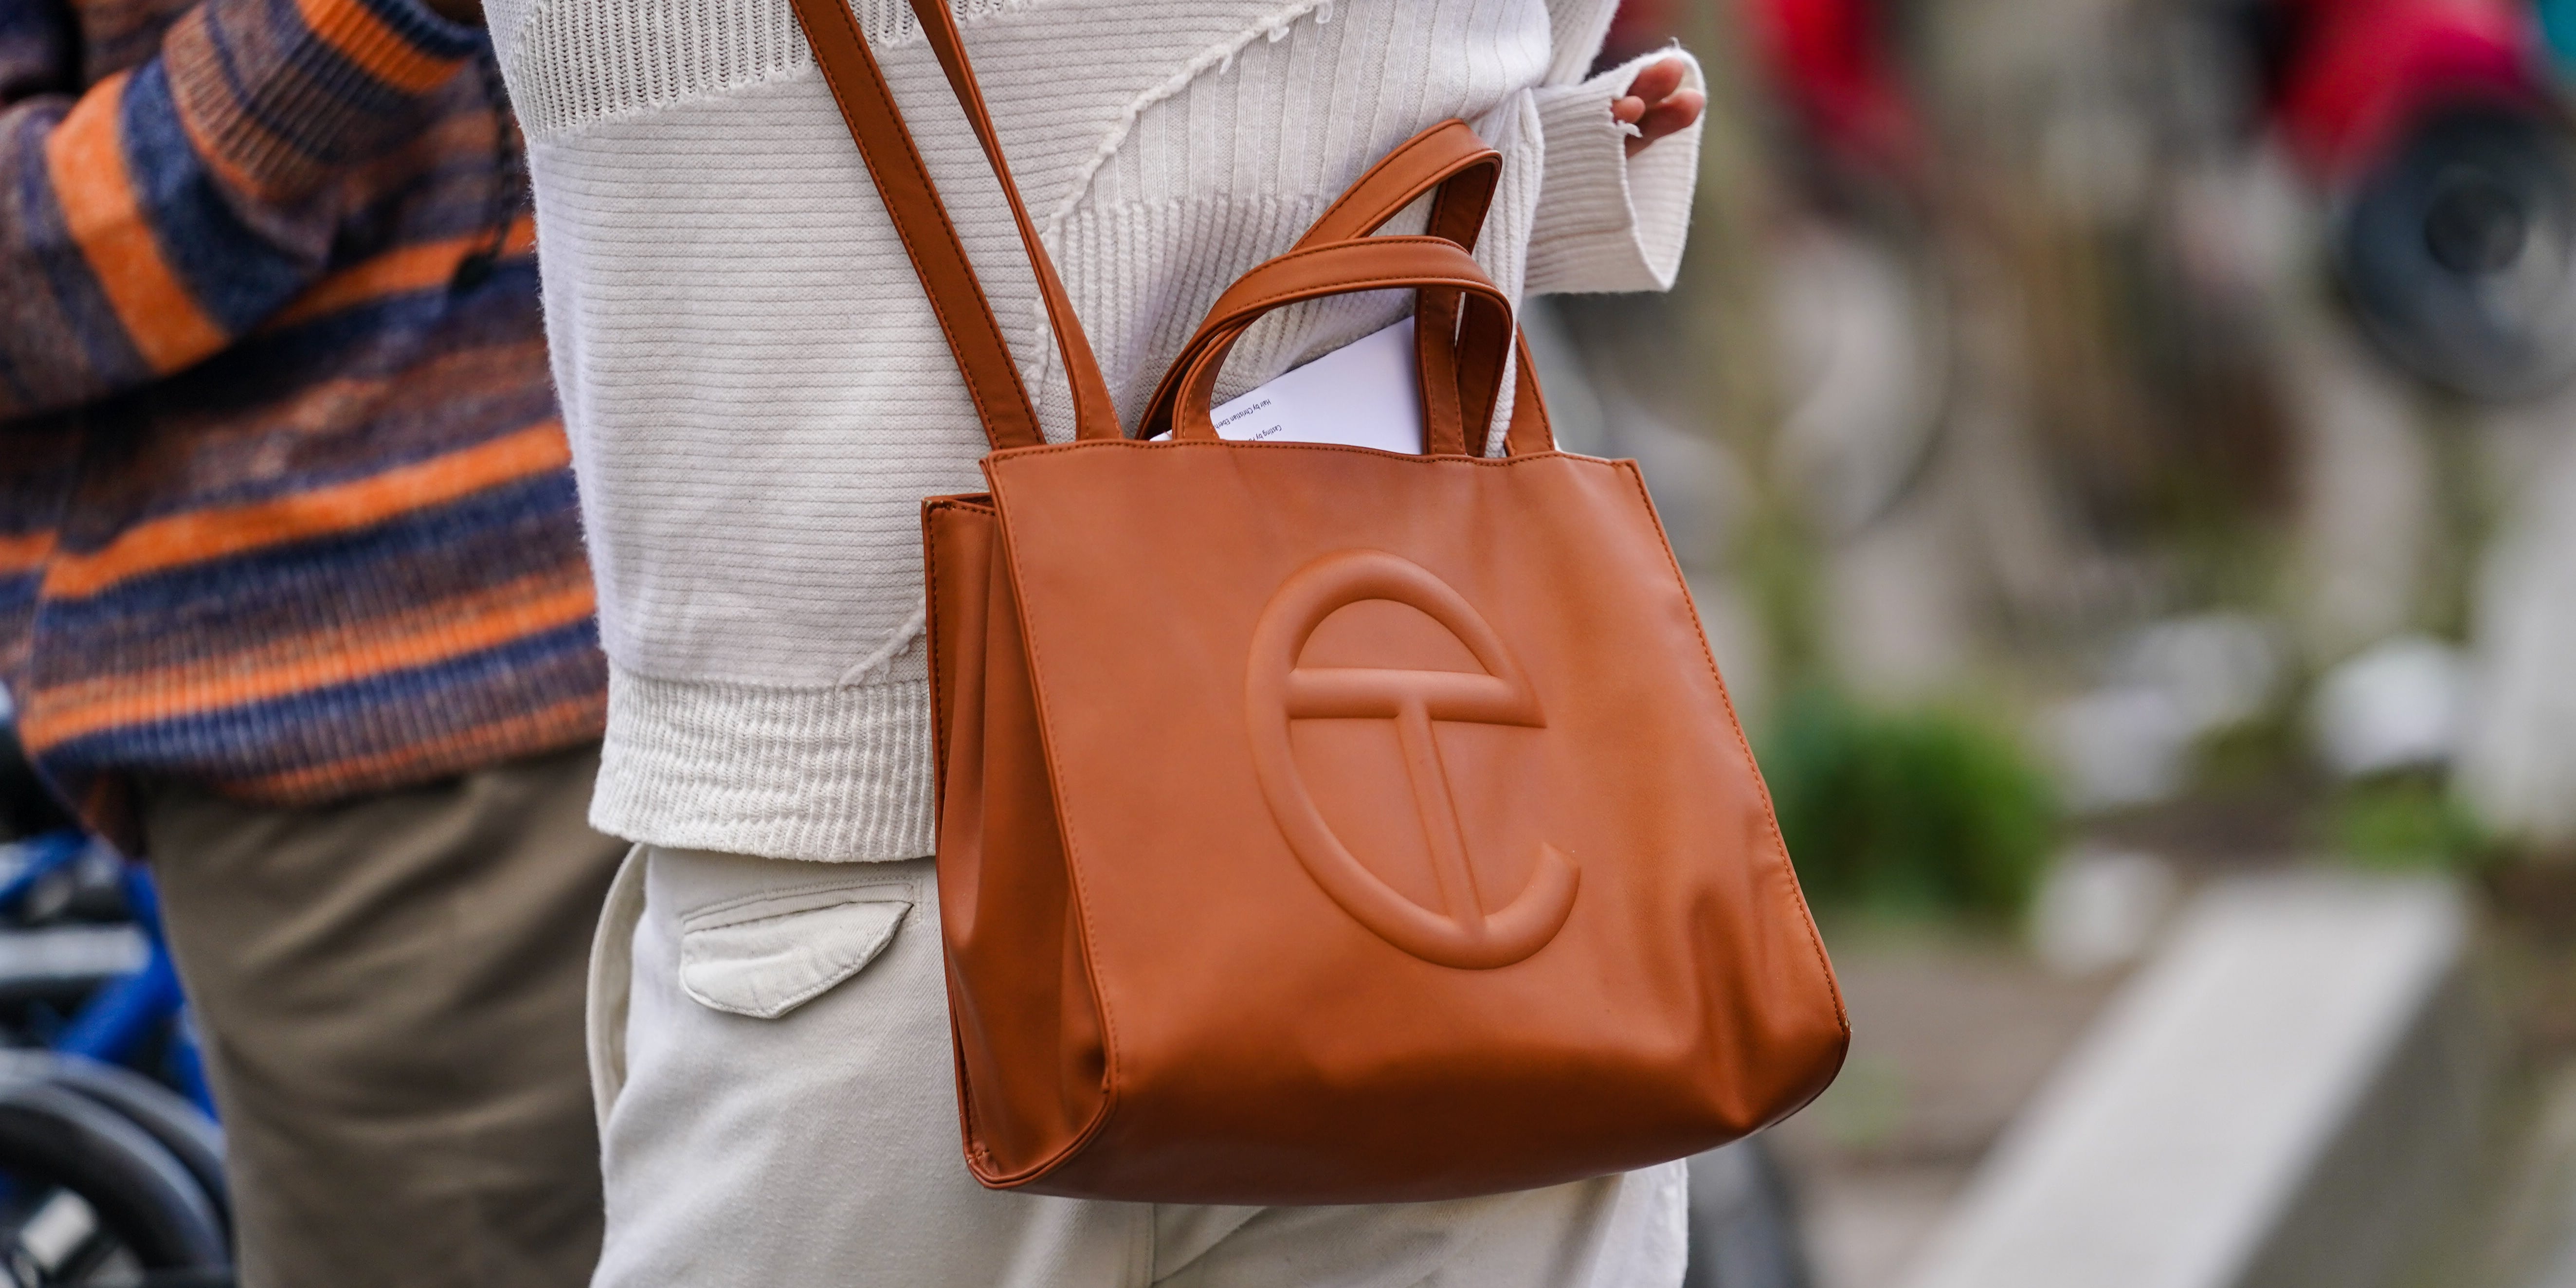 Summer 2014 Bag Trends: 25 Bucket Bags at Any Budget